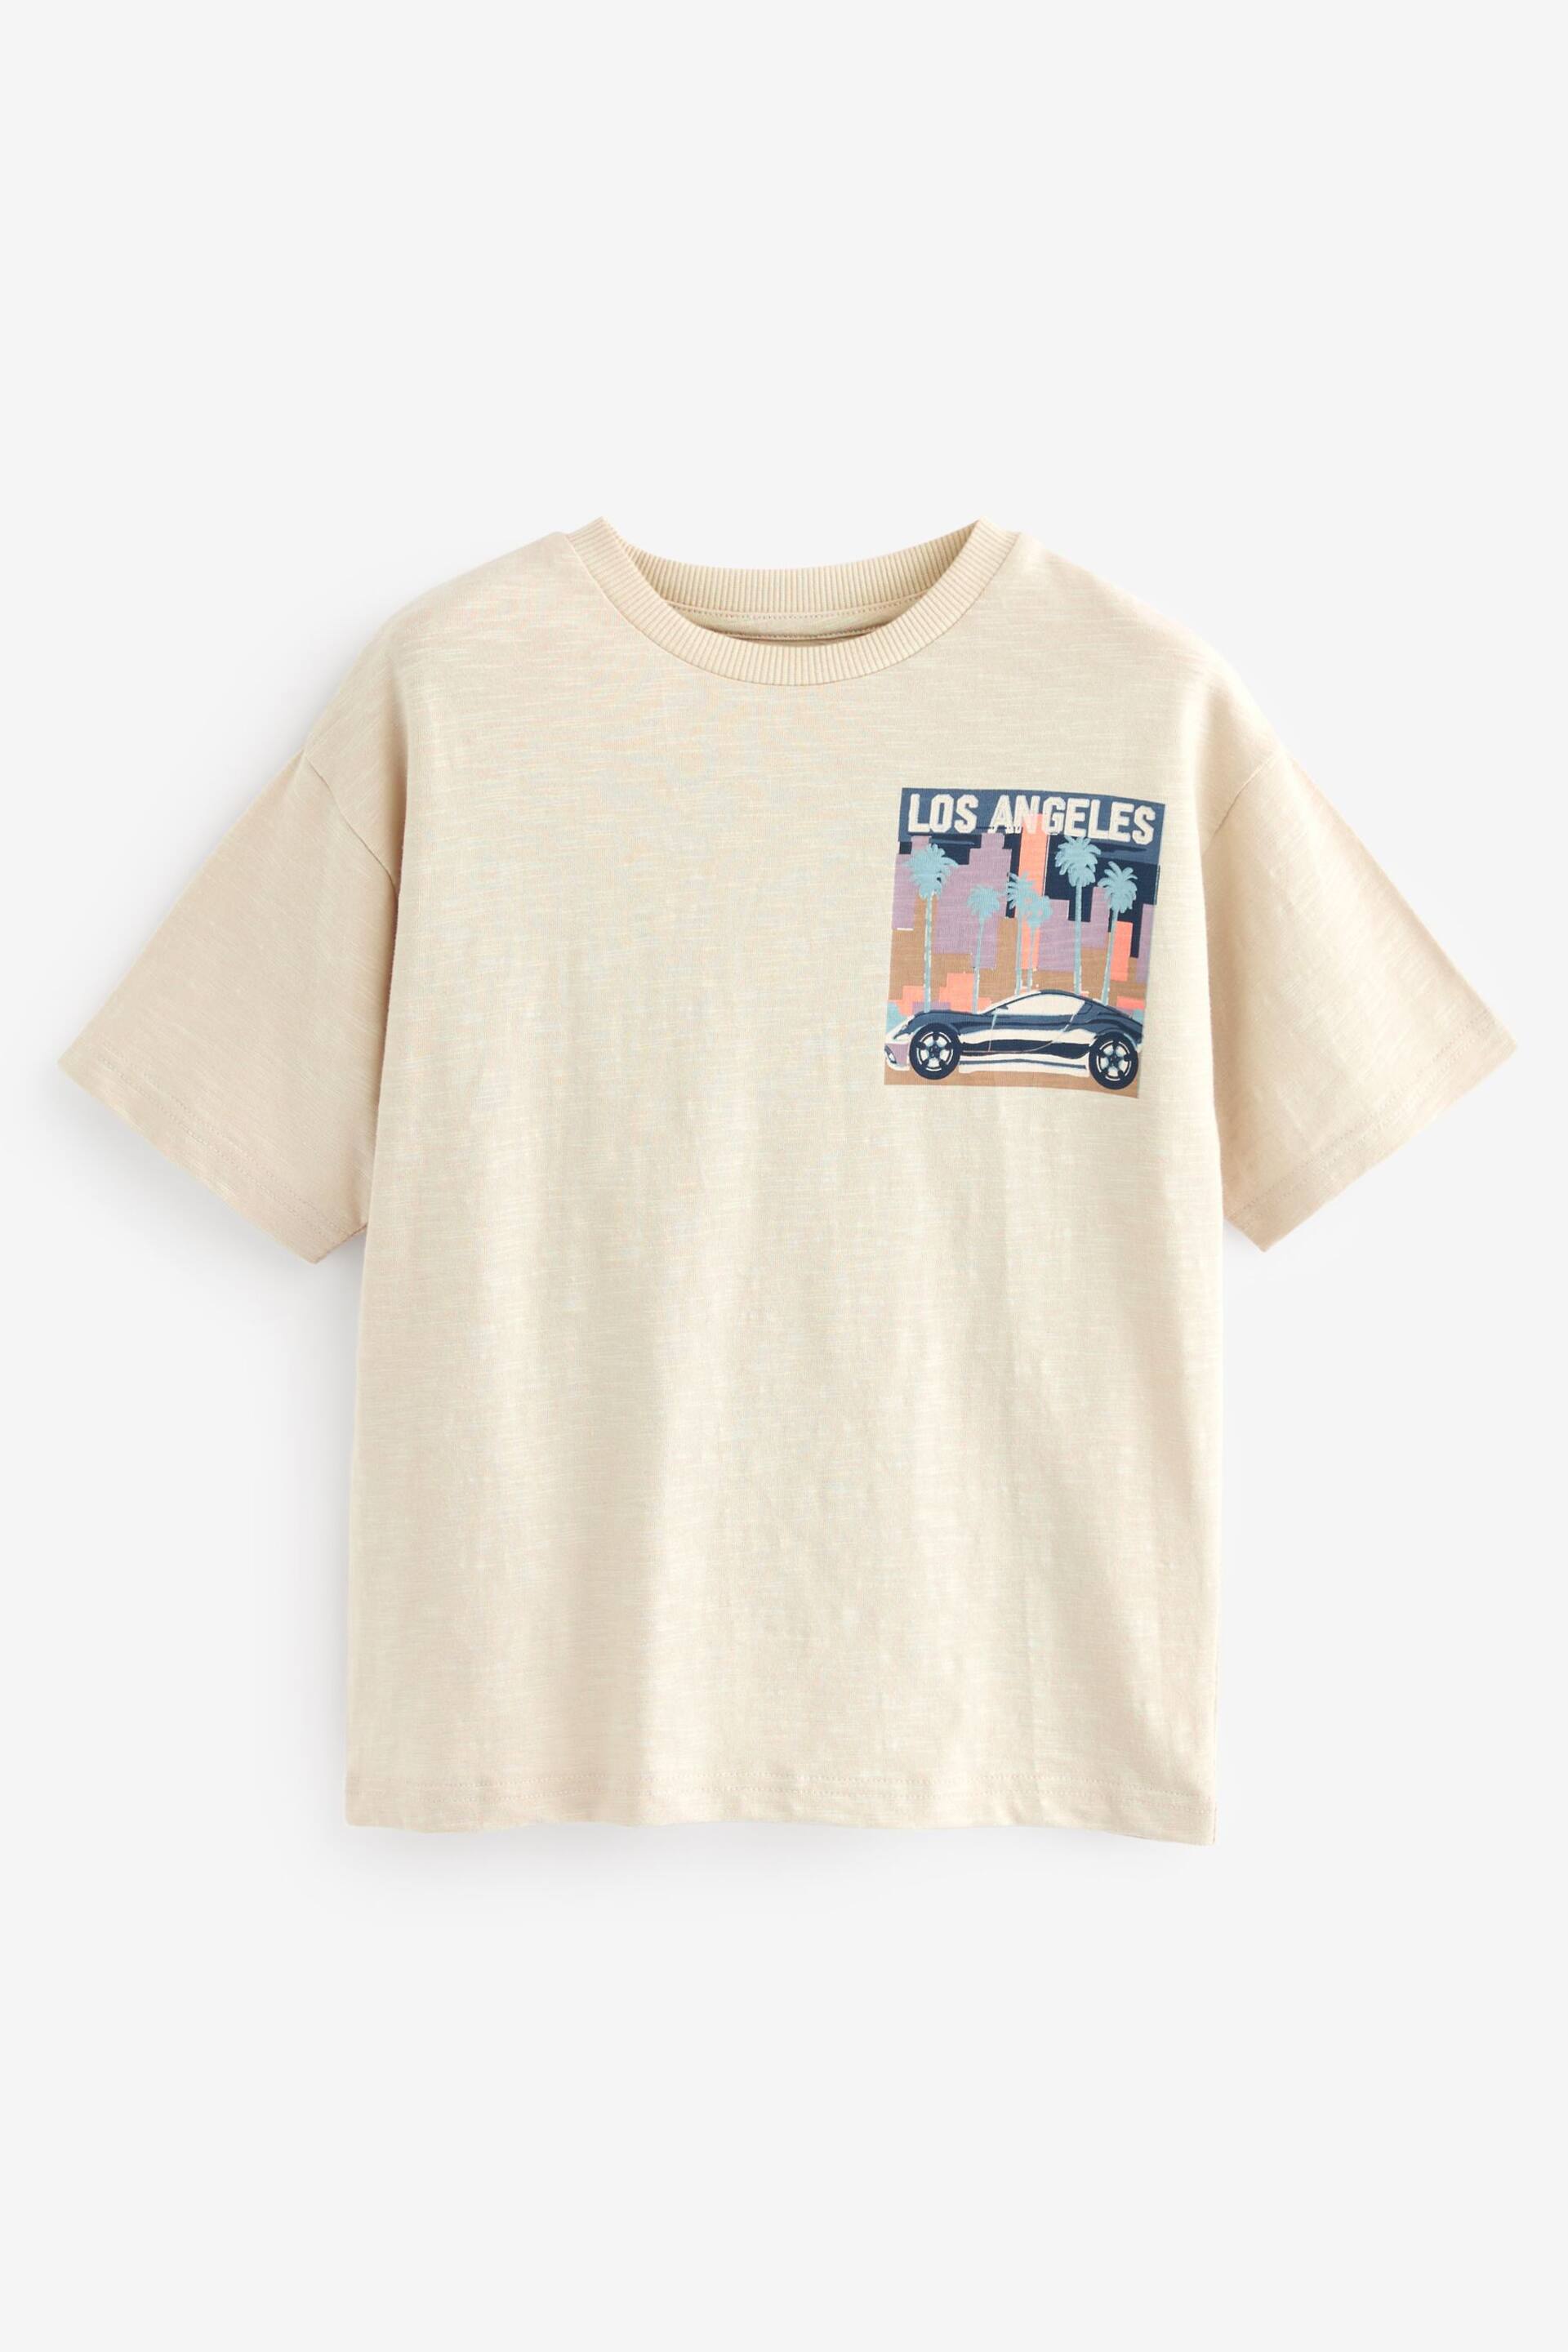 Cream Relaxed Fit Short Sleeve Graphic T-Shirt (3-16yrs) - Image 1 of 3